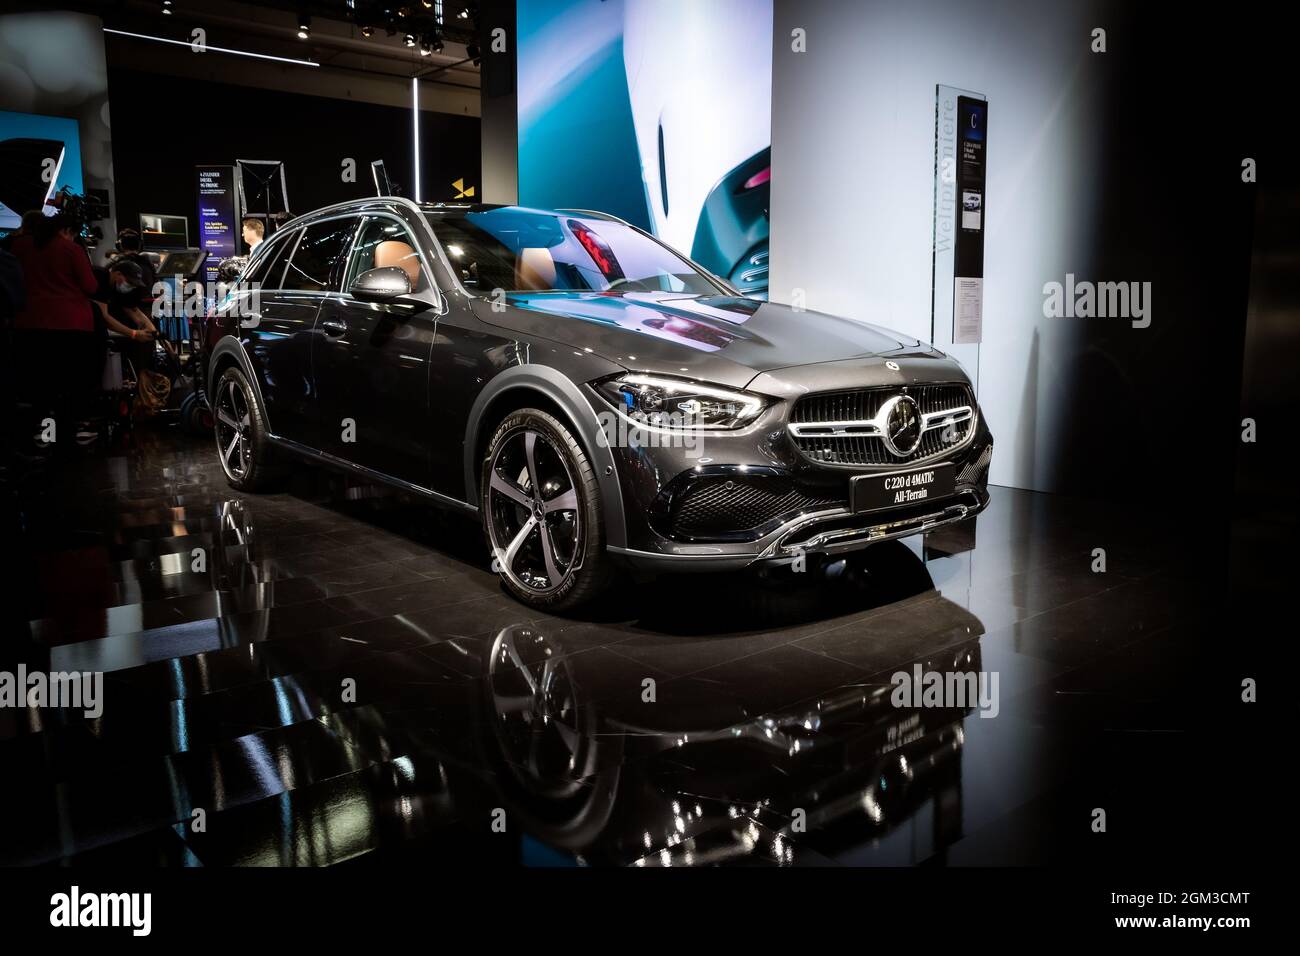 Mercedes-Benz C220d 4MATIC All-Terrain car showcased at the IAA Mobility 2021 motor show in Munich, Germany - September 6, 2021. Stock Photo